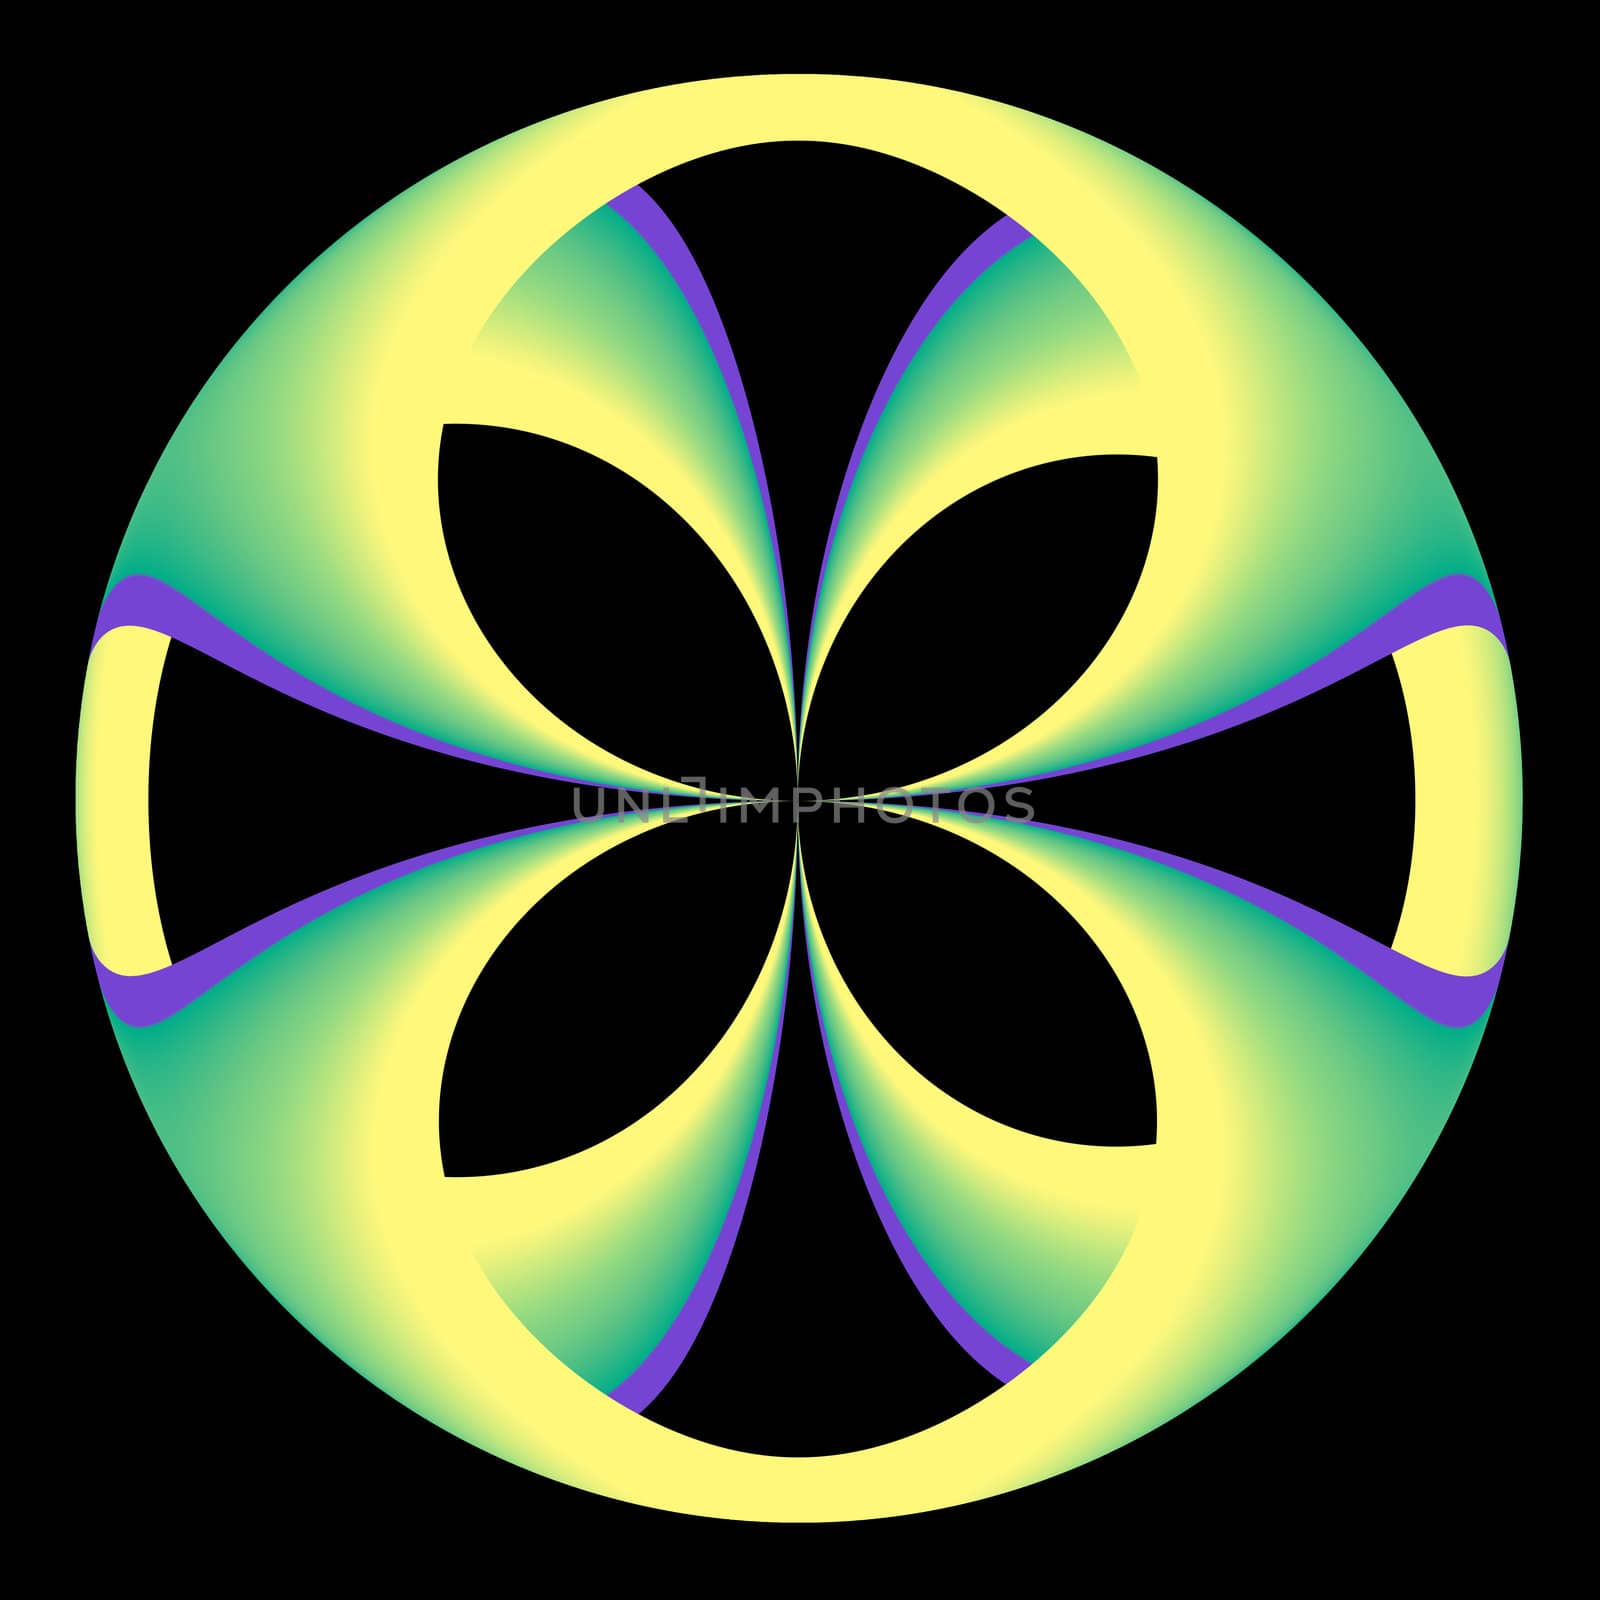 An abstract circular fractal done is shades of yellow, green, and purple.